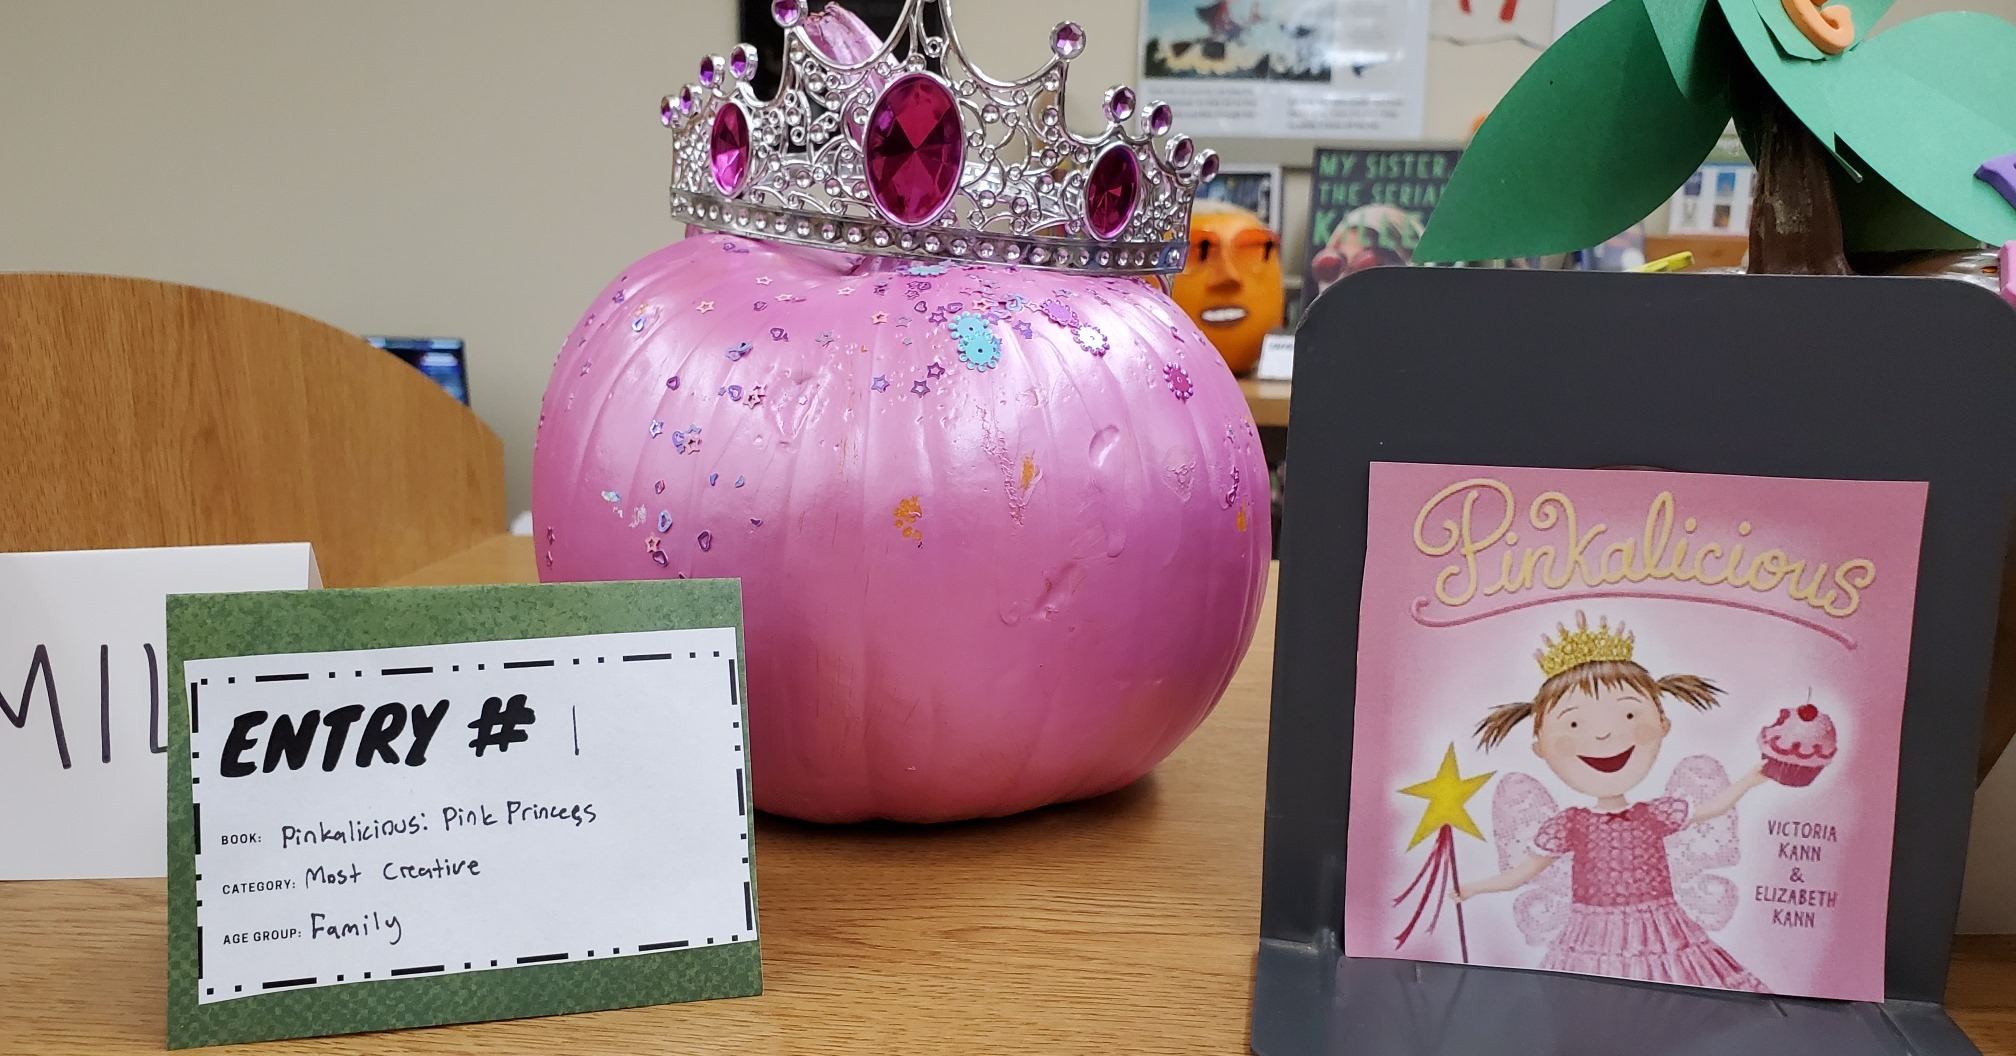 Pumpkin painted pink with a crown on it, sitting on a table next to a Pinkalicious book.